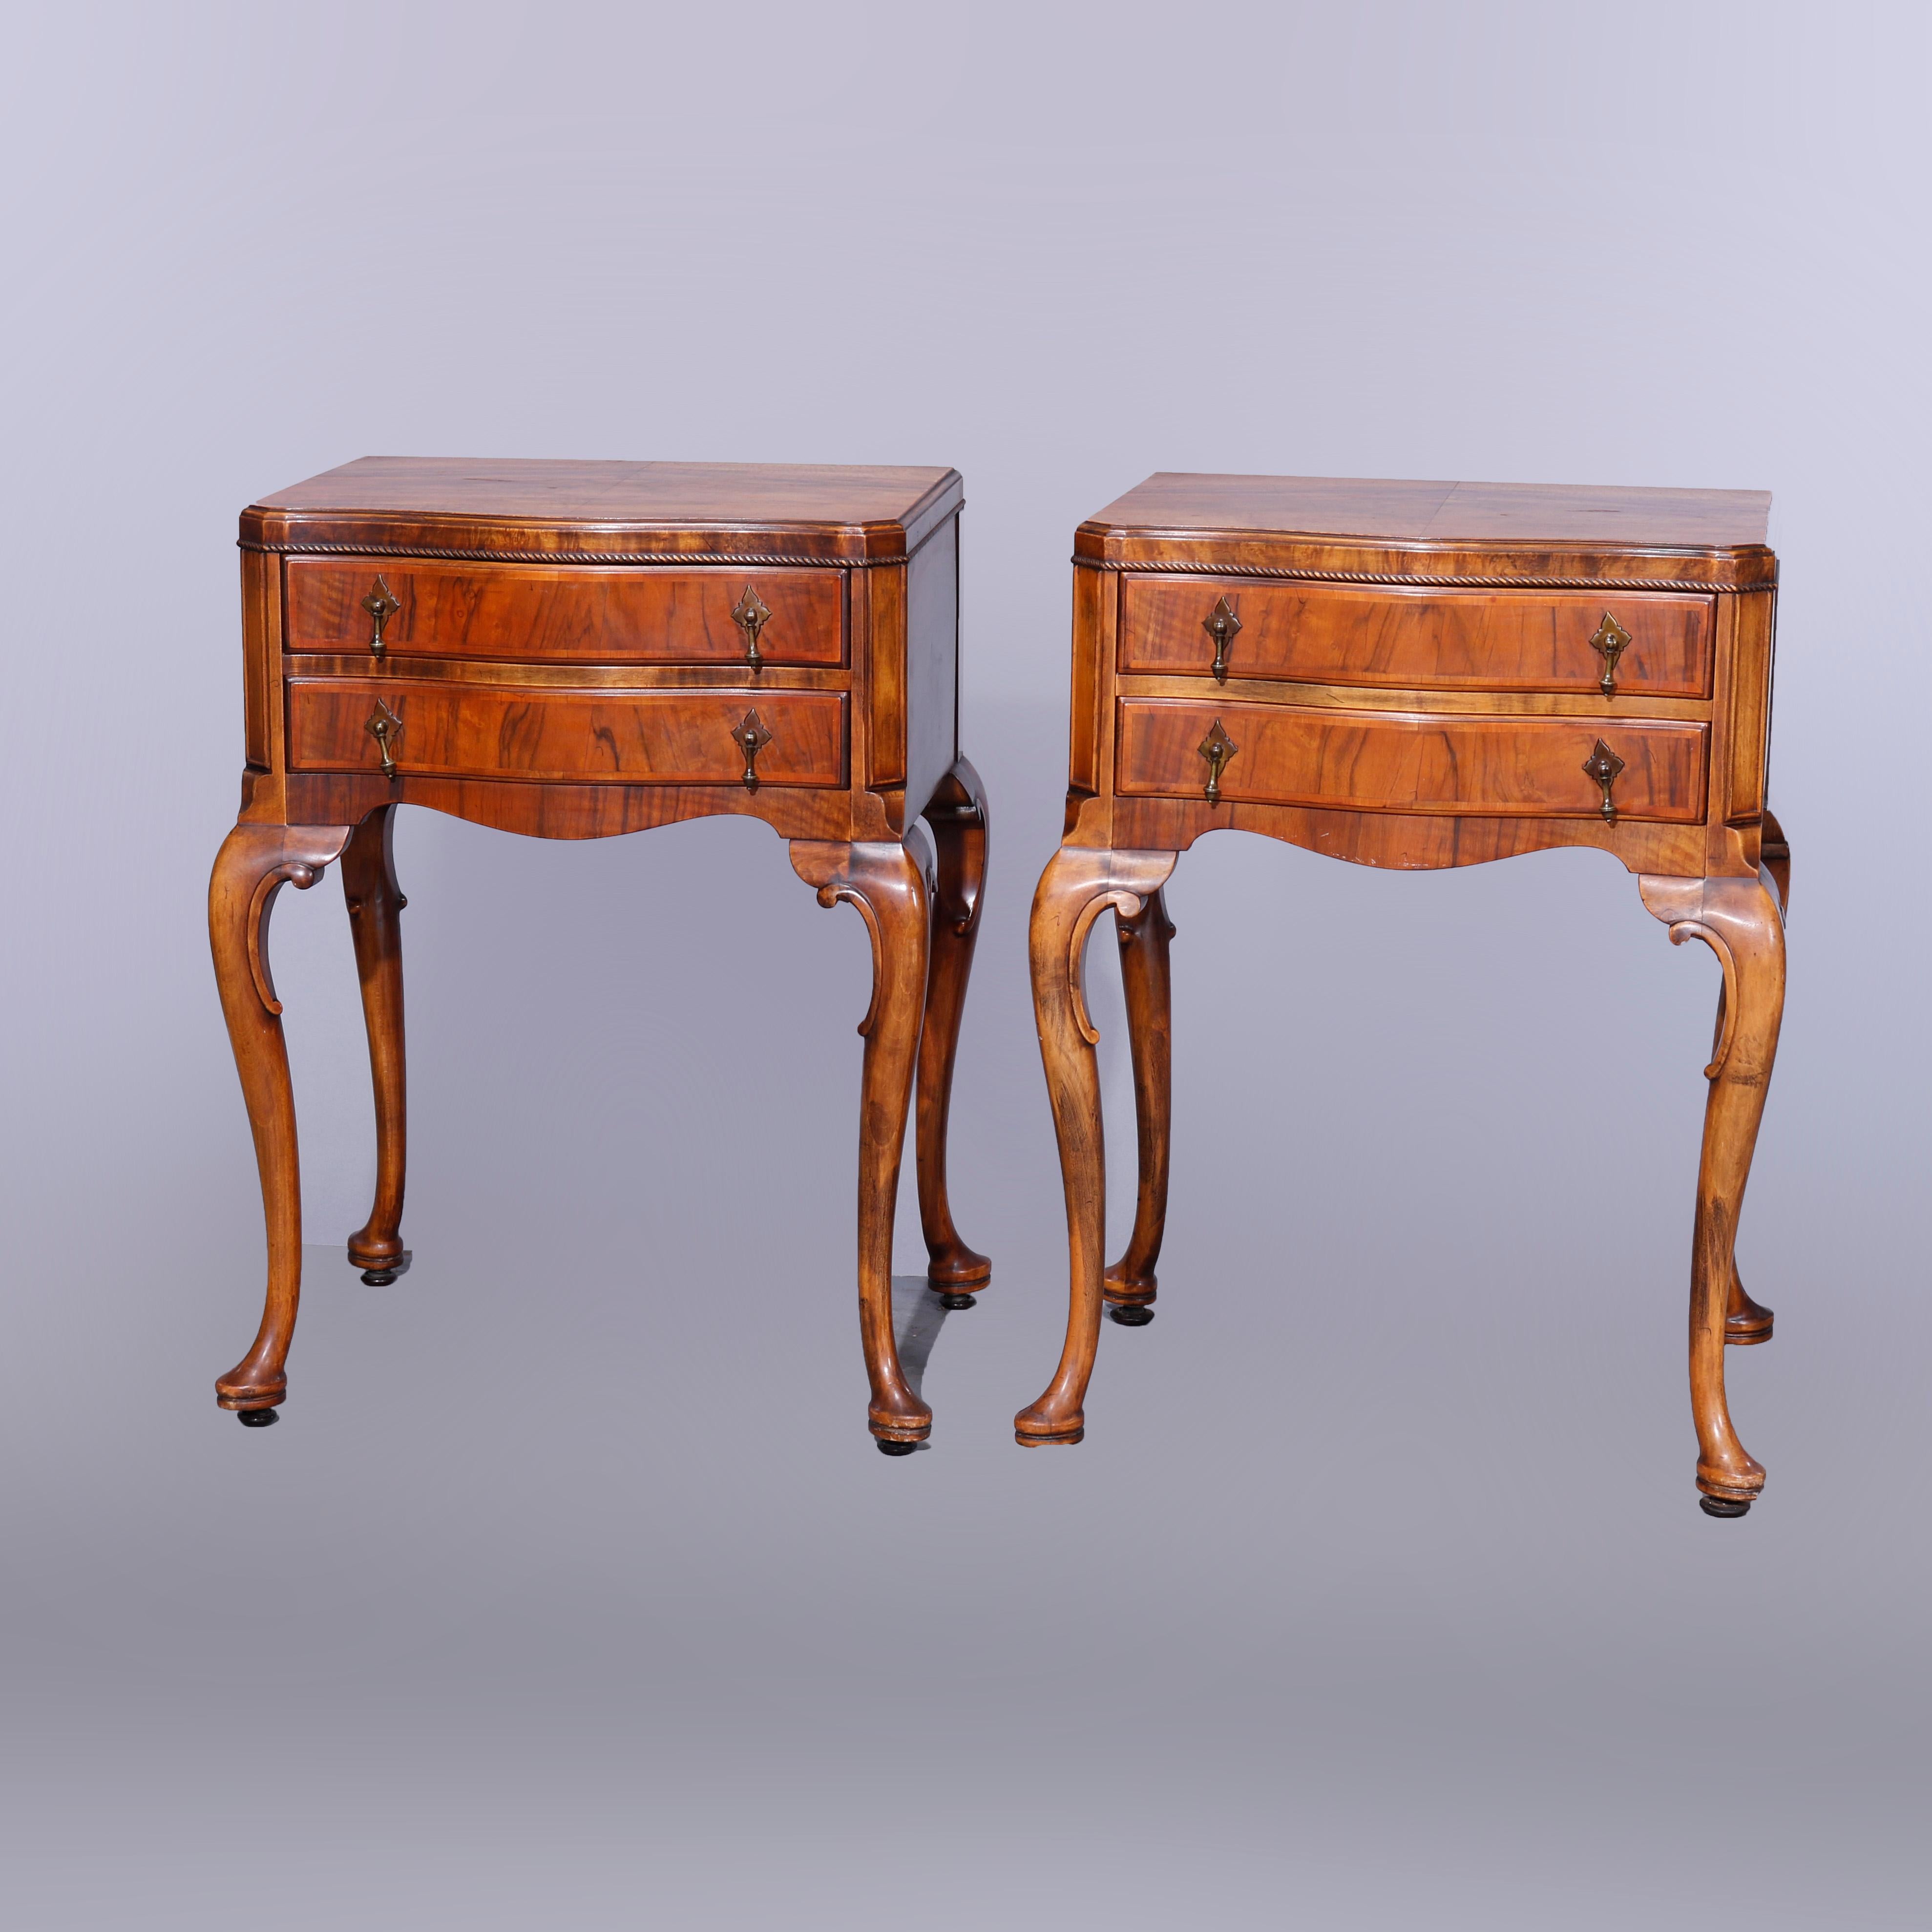 An antique pair of Queen Anne style side stands offer deeply striated English Circassian walnut construction with shaped tops over double drawer cases having rope twist trim and raised on cabriole legs terminating in pad feet, c1930

Measures -